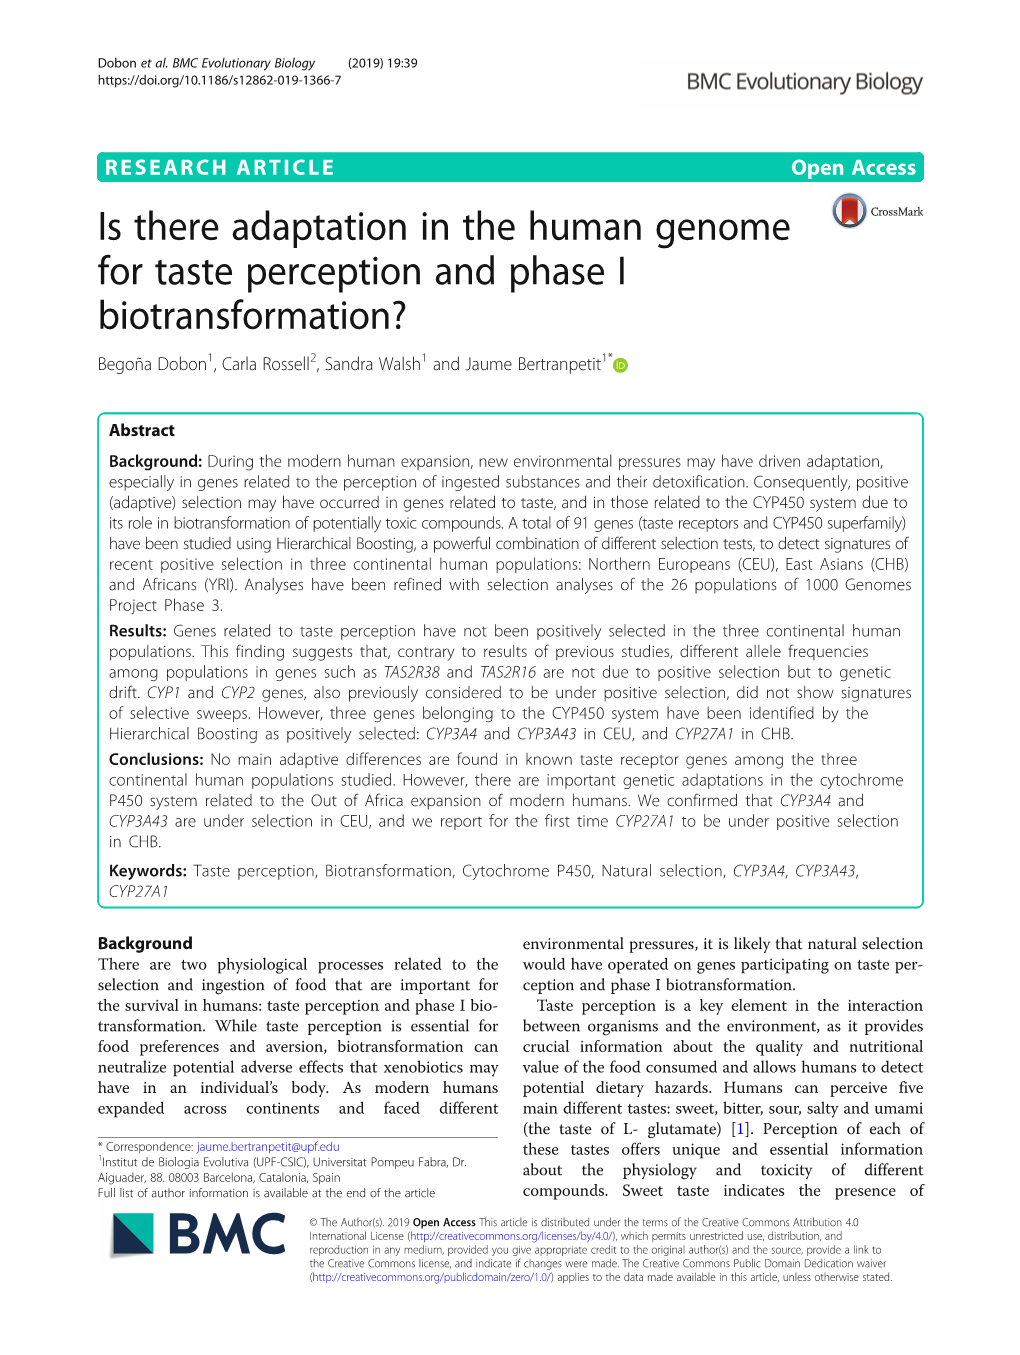 Is There Adaptation in the Human Genome for Taste Perception and Phase I Biotransformation? Begoña Dobon1, Carla Rossell2, Sandra Walsh1 and Jaume Bertranpetit1*